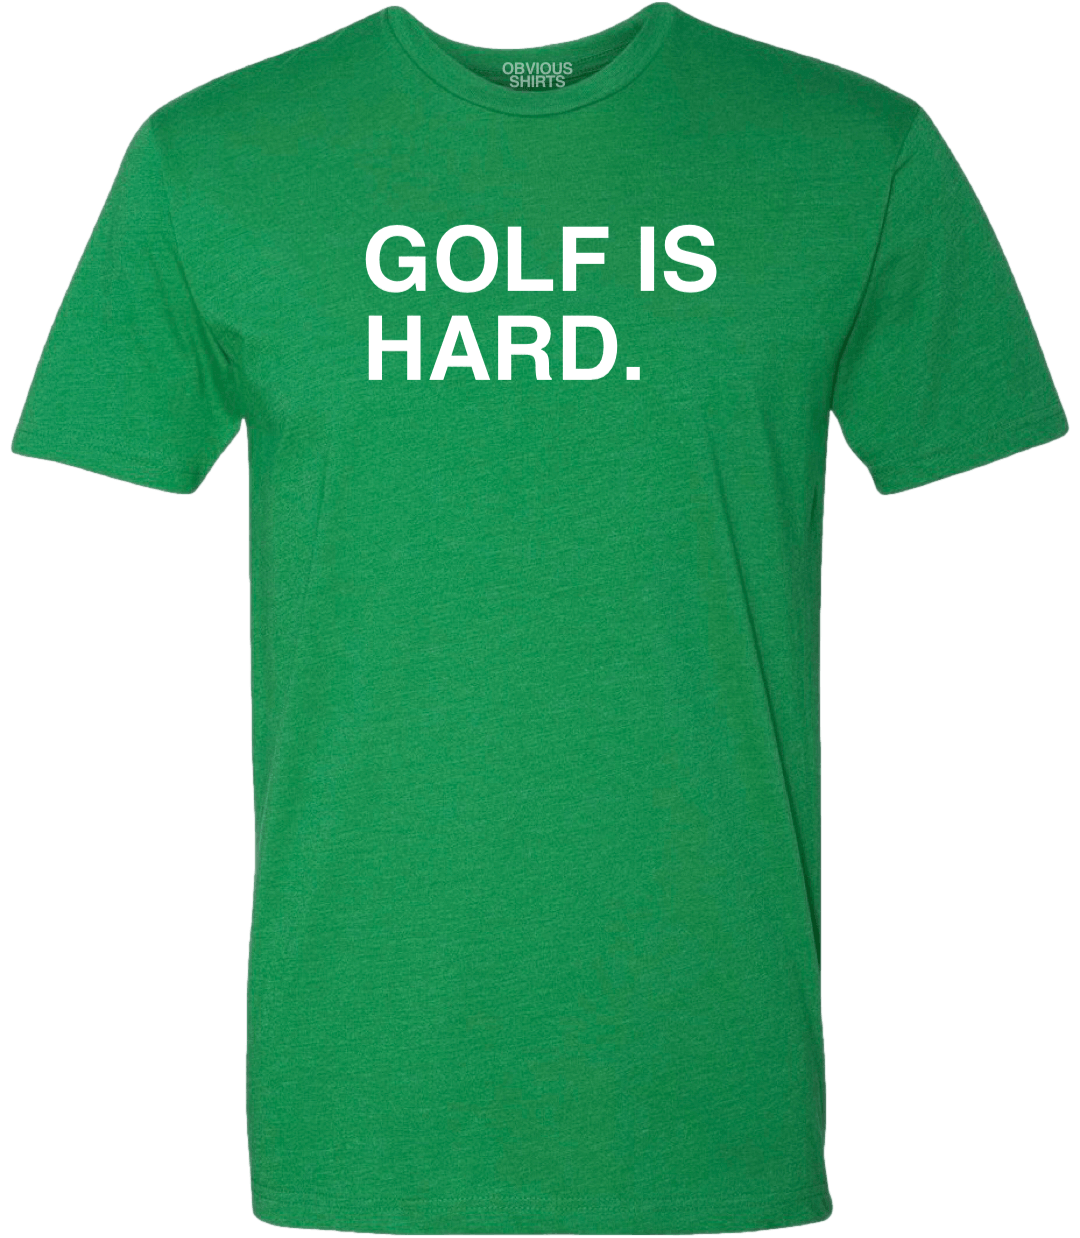 GOLF IS HARD. - OBVIOUS SHIRTS